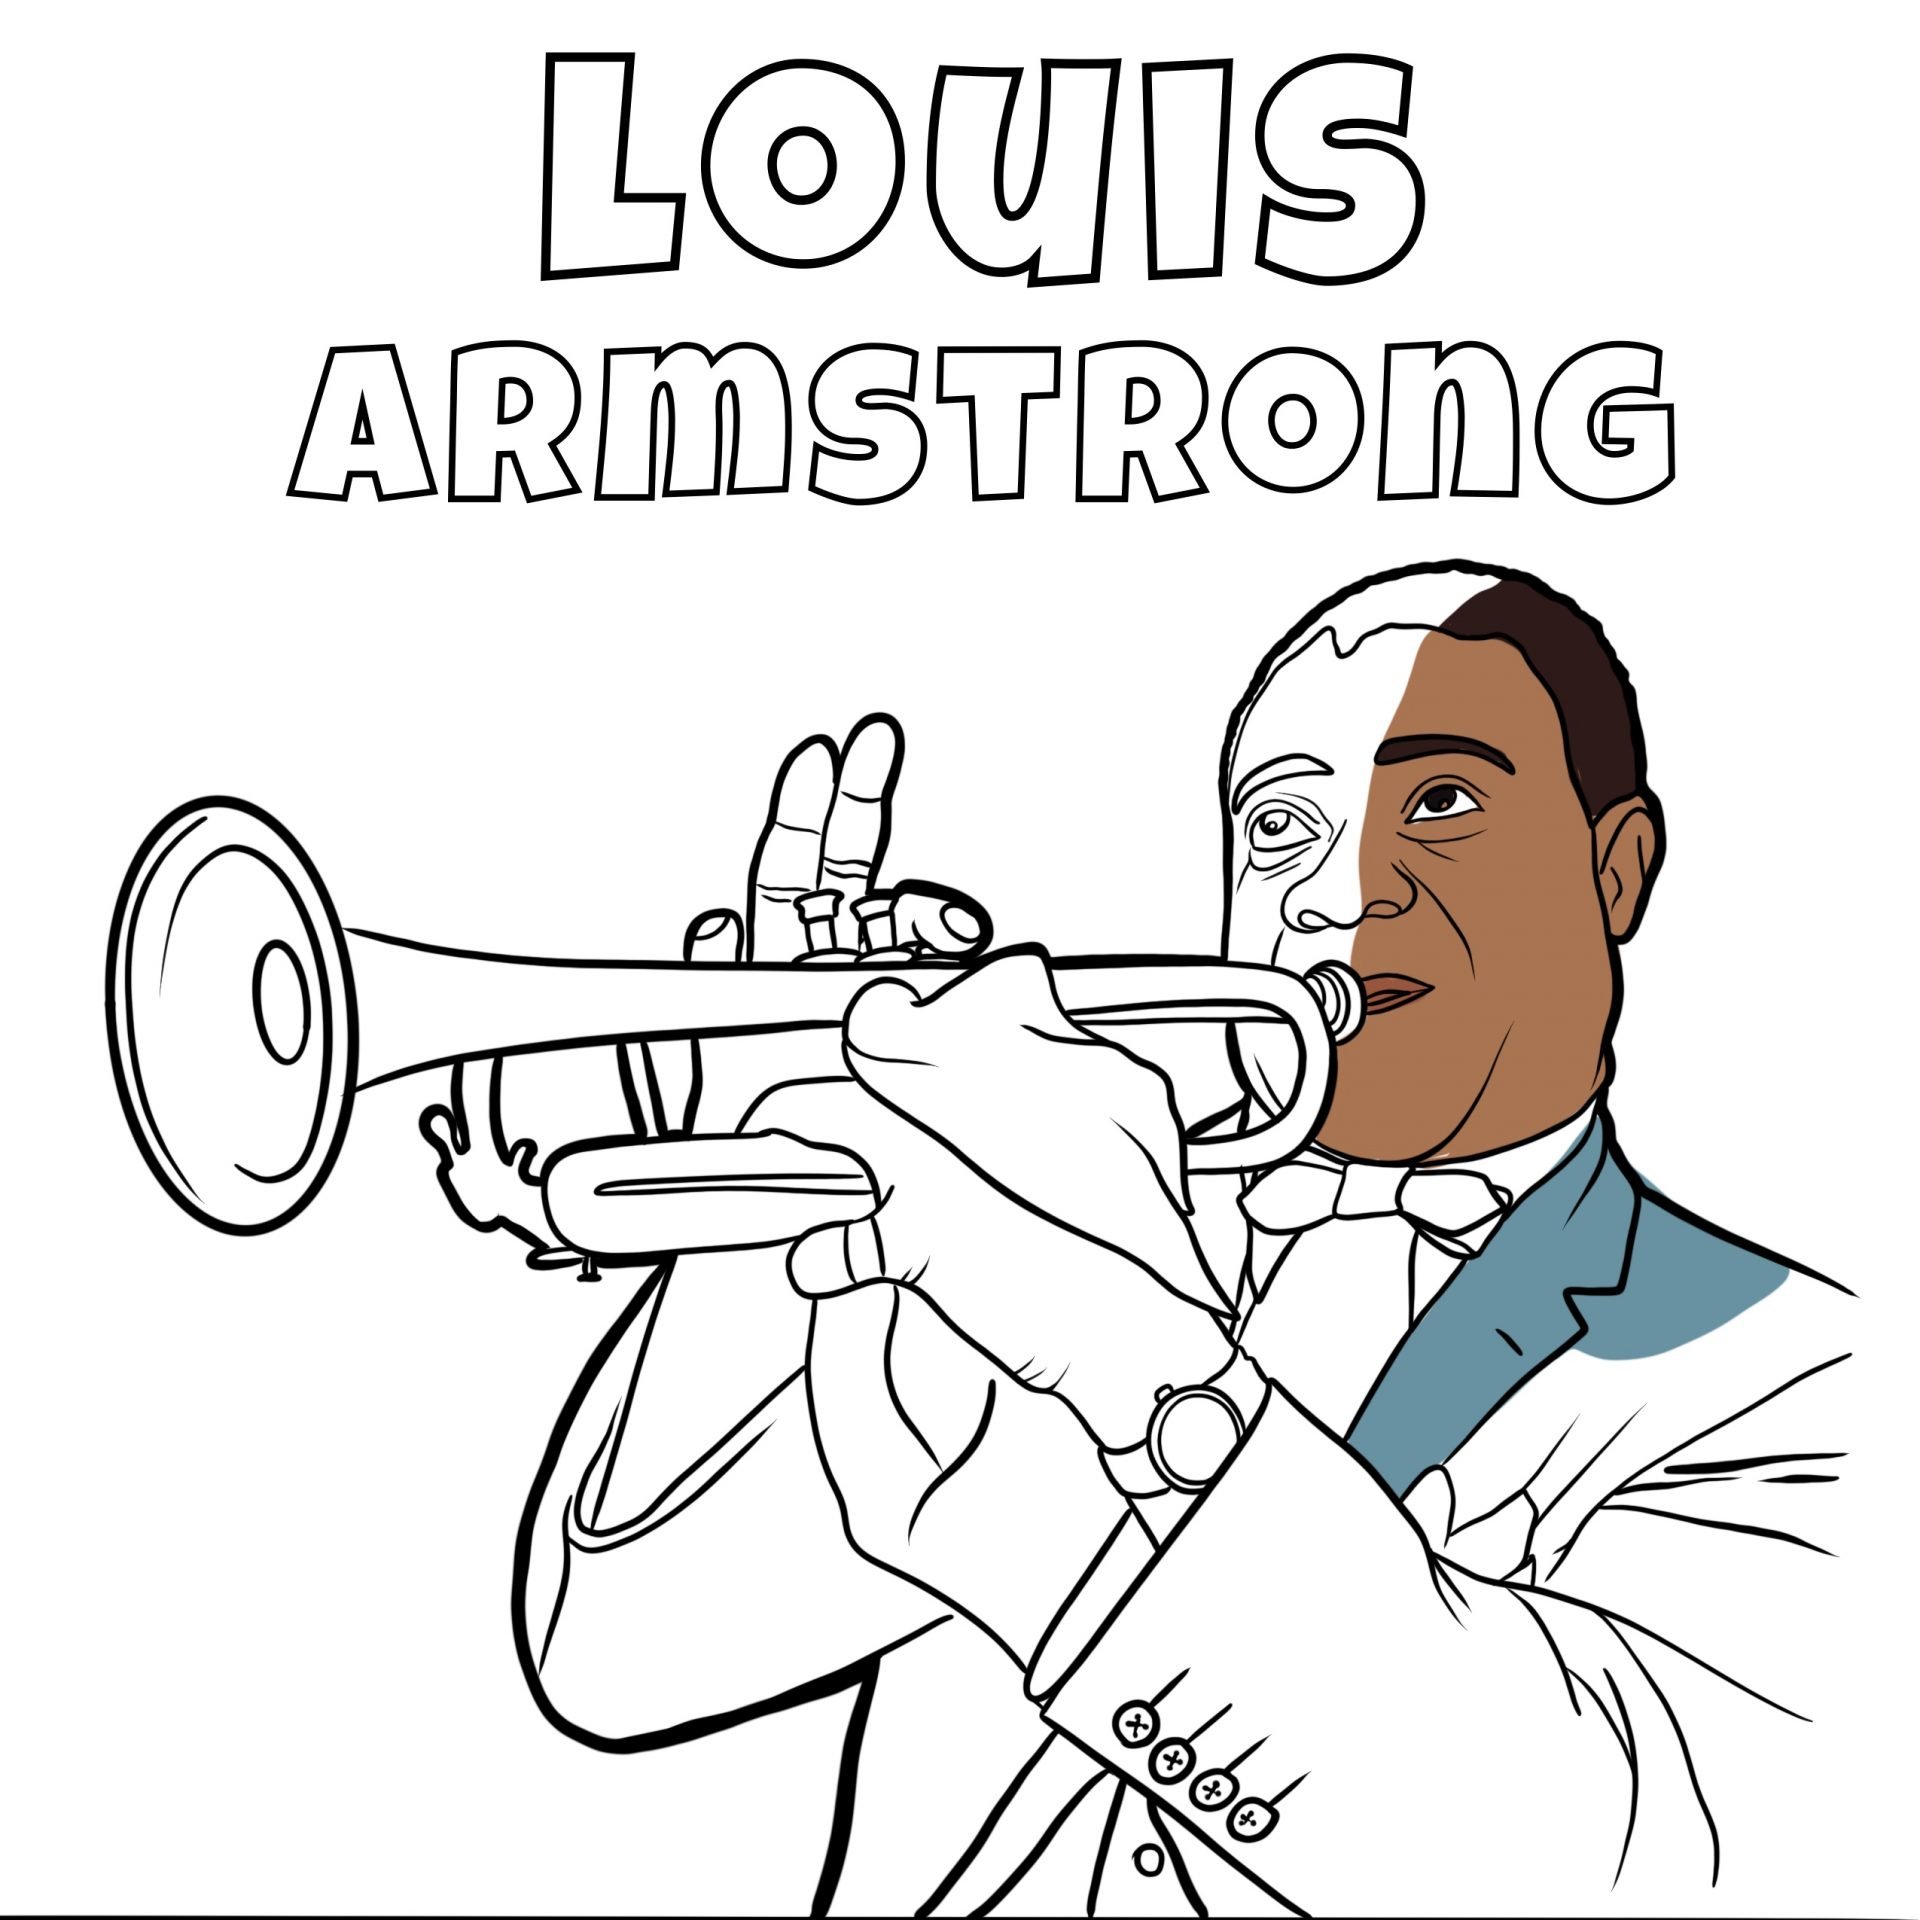 Louis armstrong coloring page